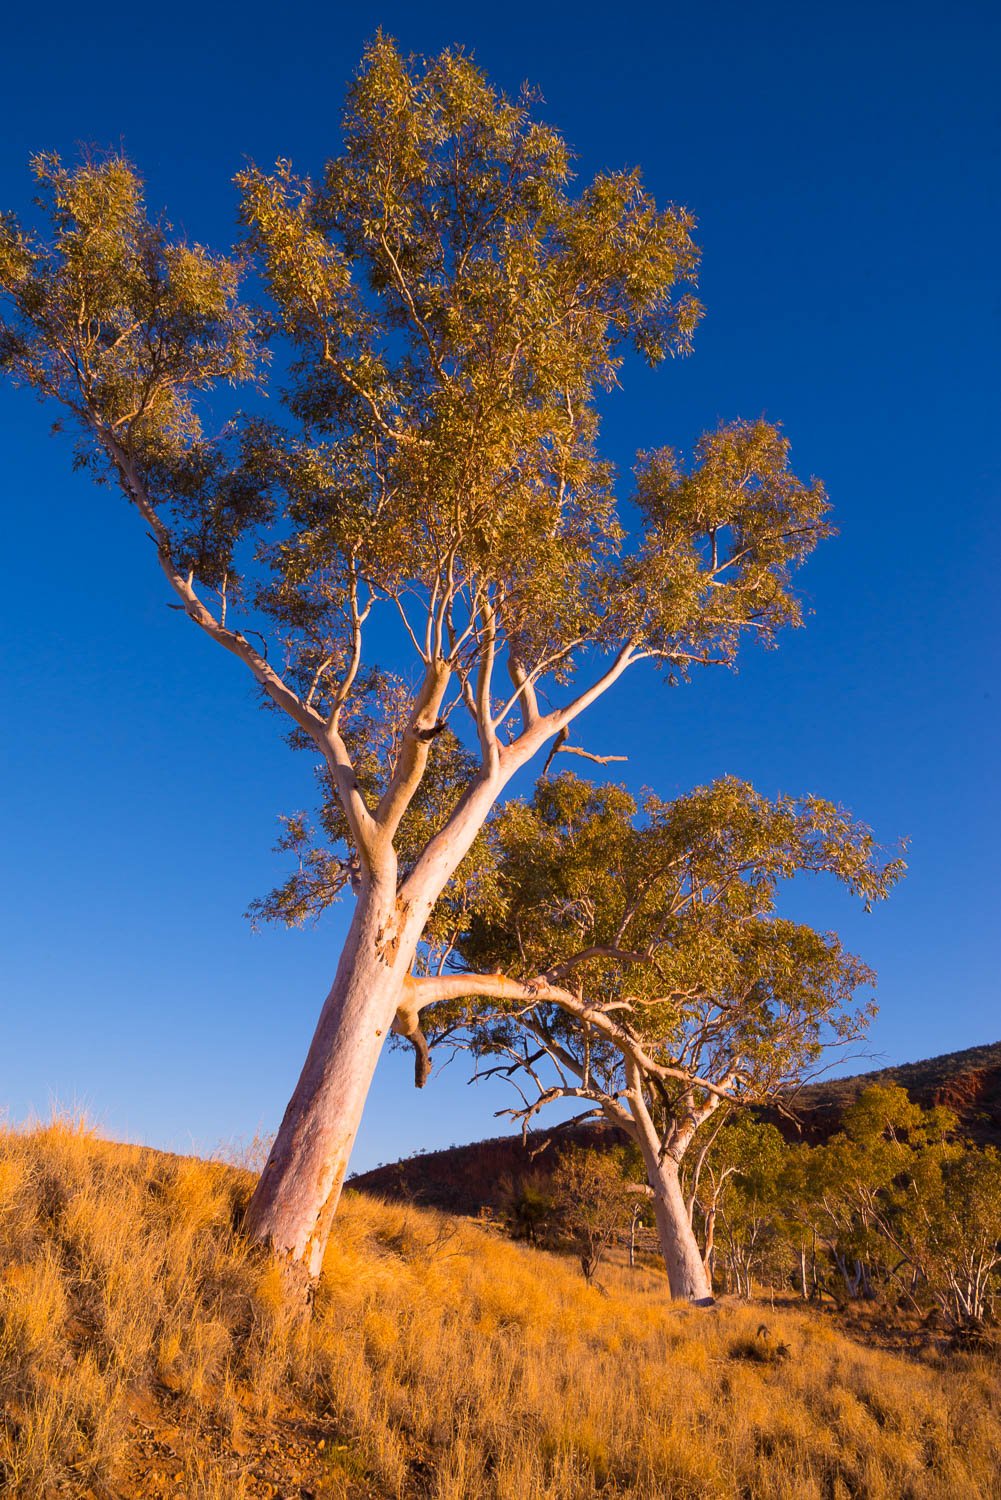 Two long trees, and a lot of bushes in the ground, Finke River Red Gums, West MacDonnell Ranges - Northern Territory